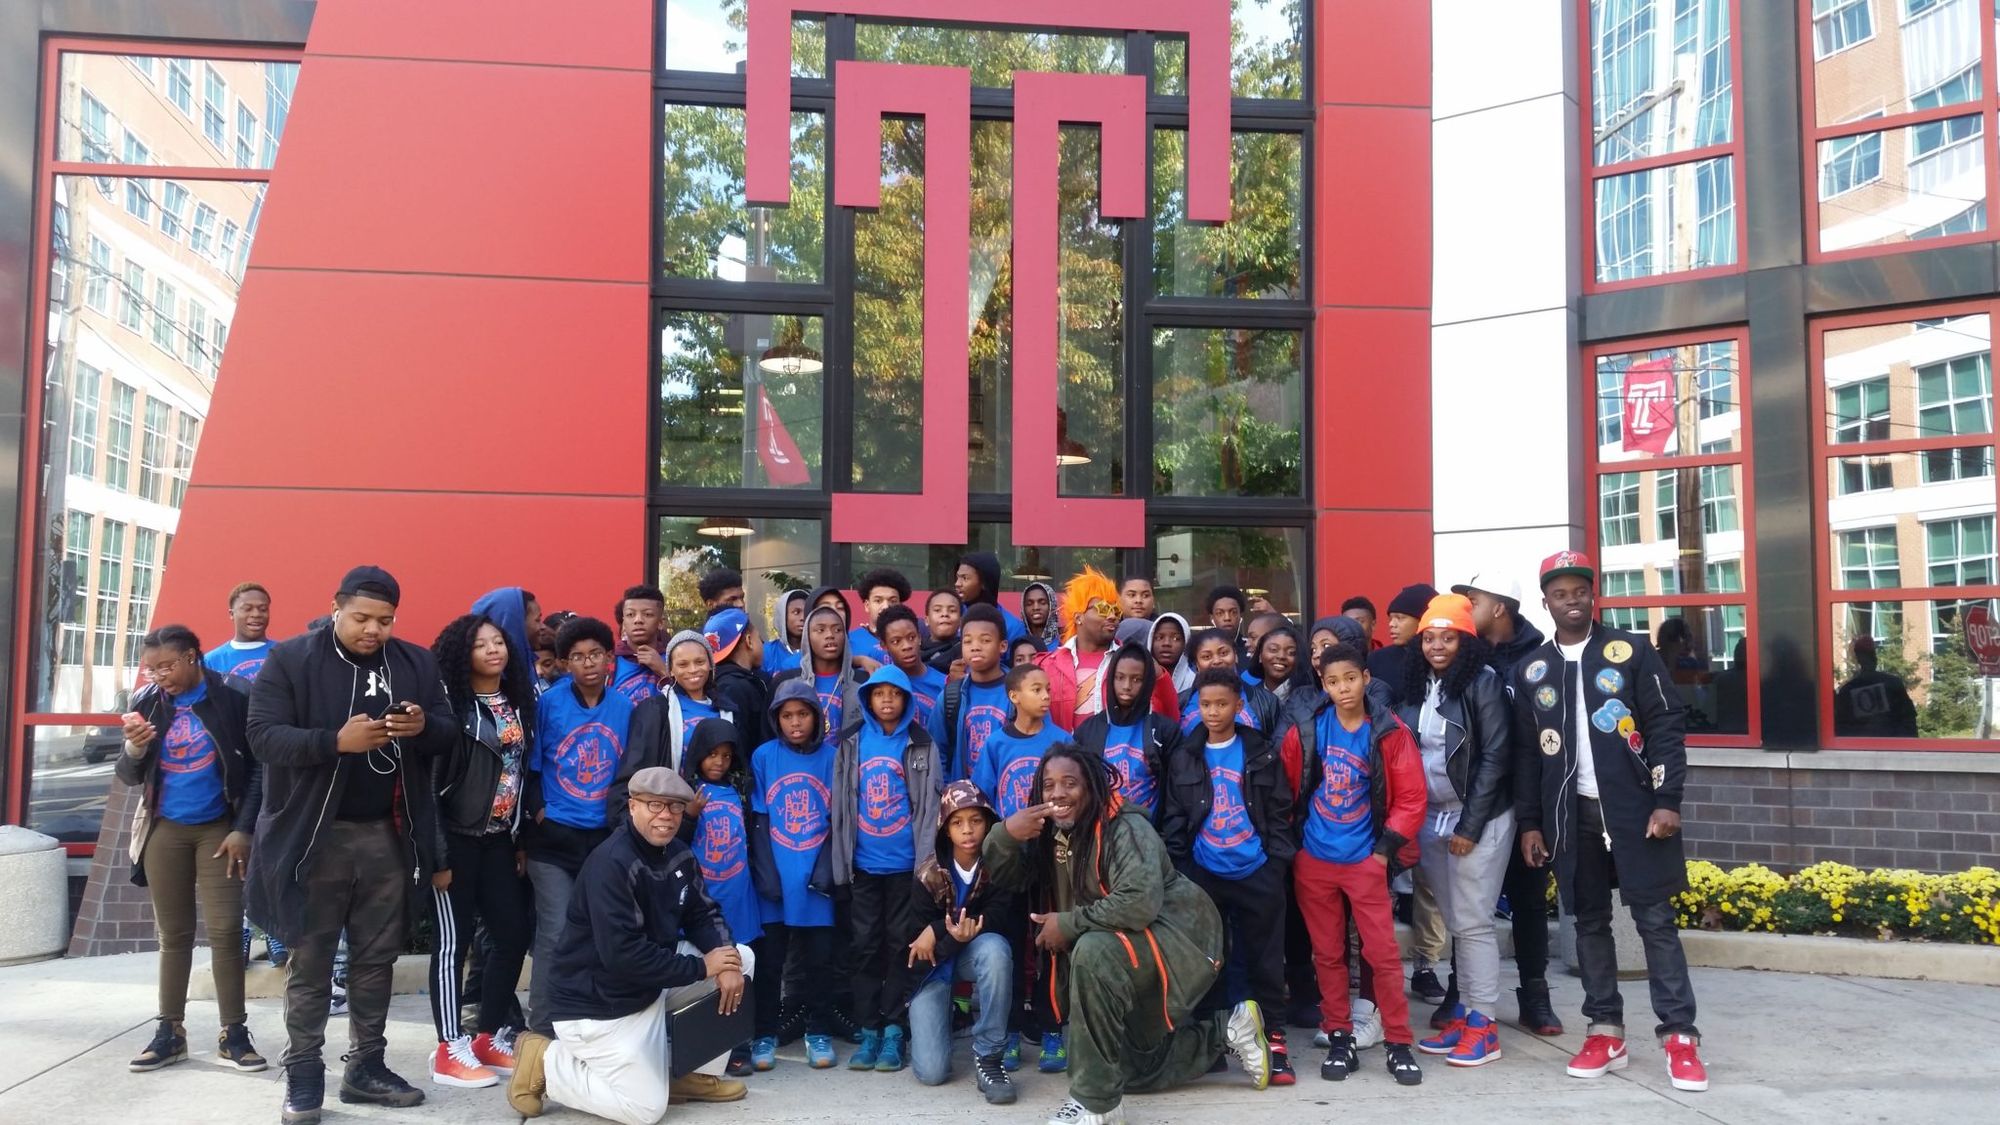 A Safer, Smarter Halloween Meant Fort Greene Teens Traveling Far From Home